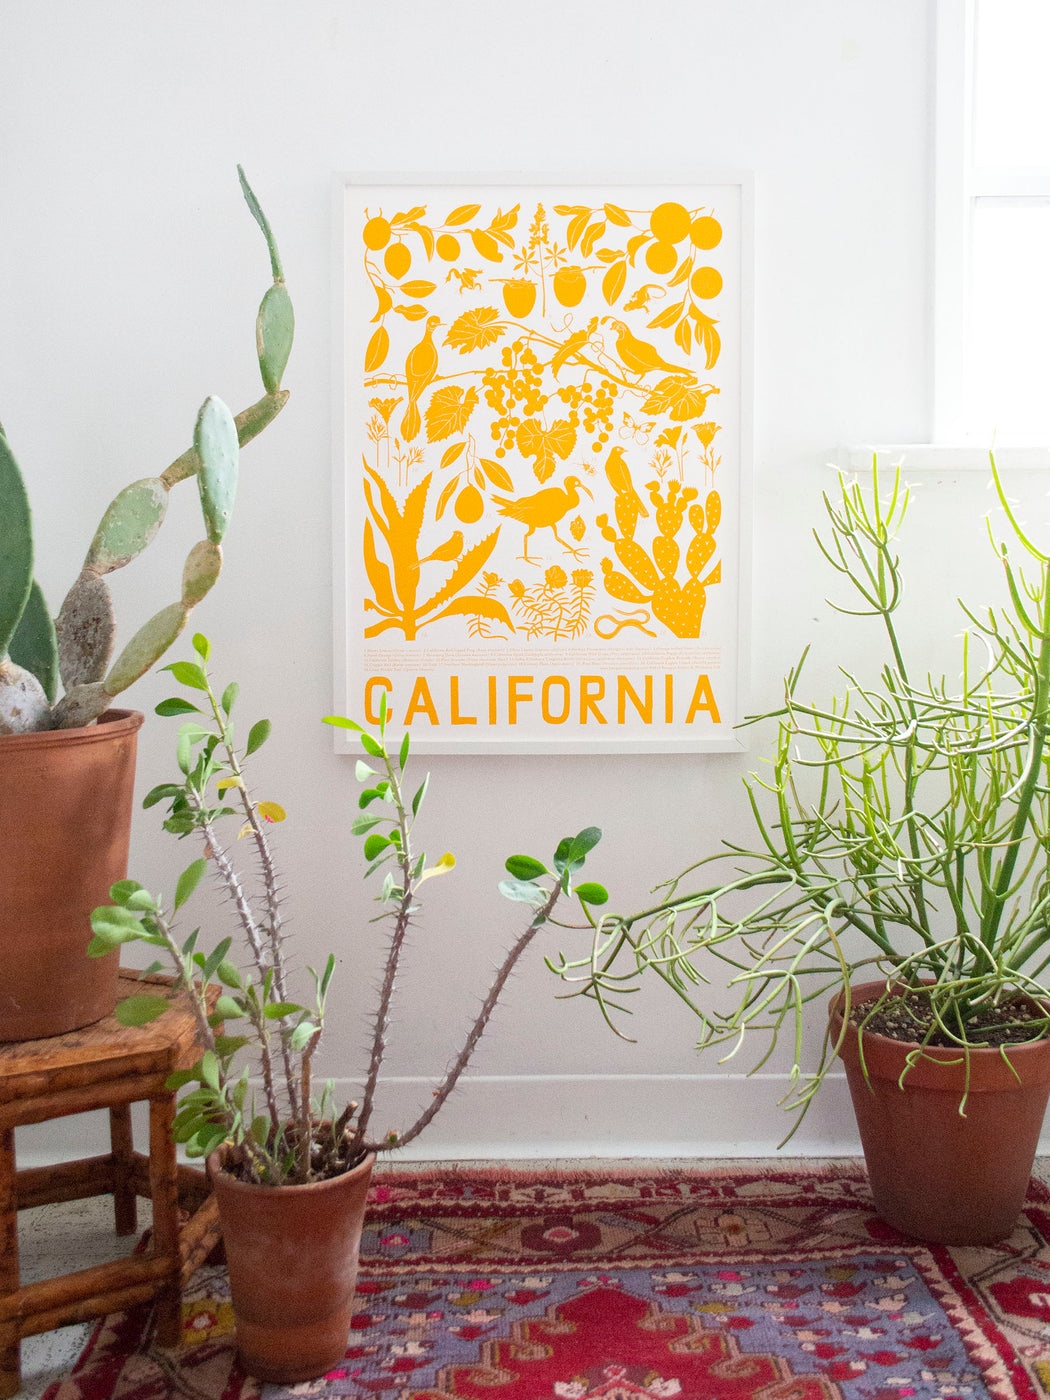 California Screen Print with cacti and other plants and animals